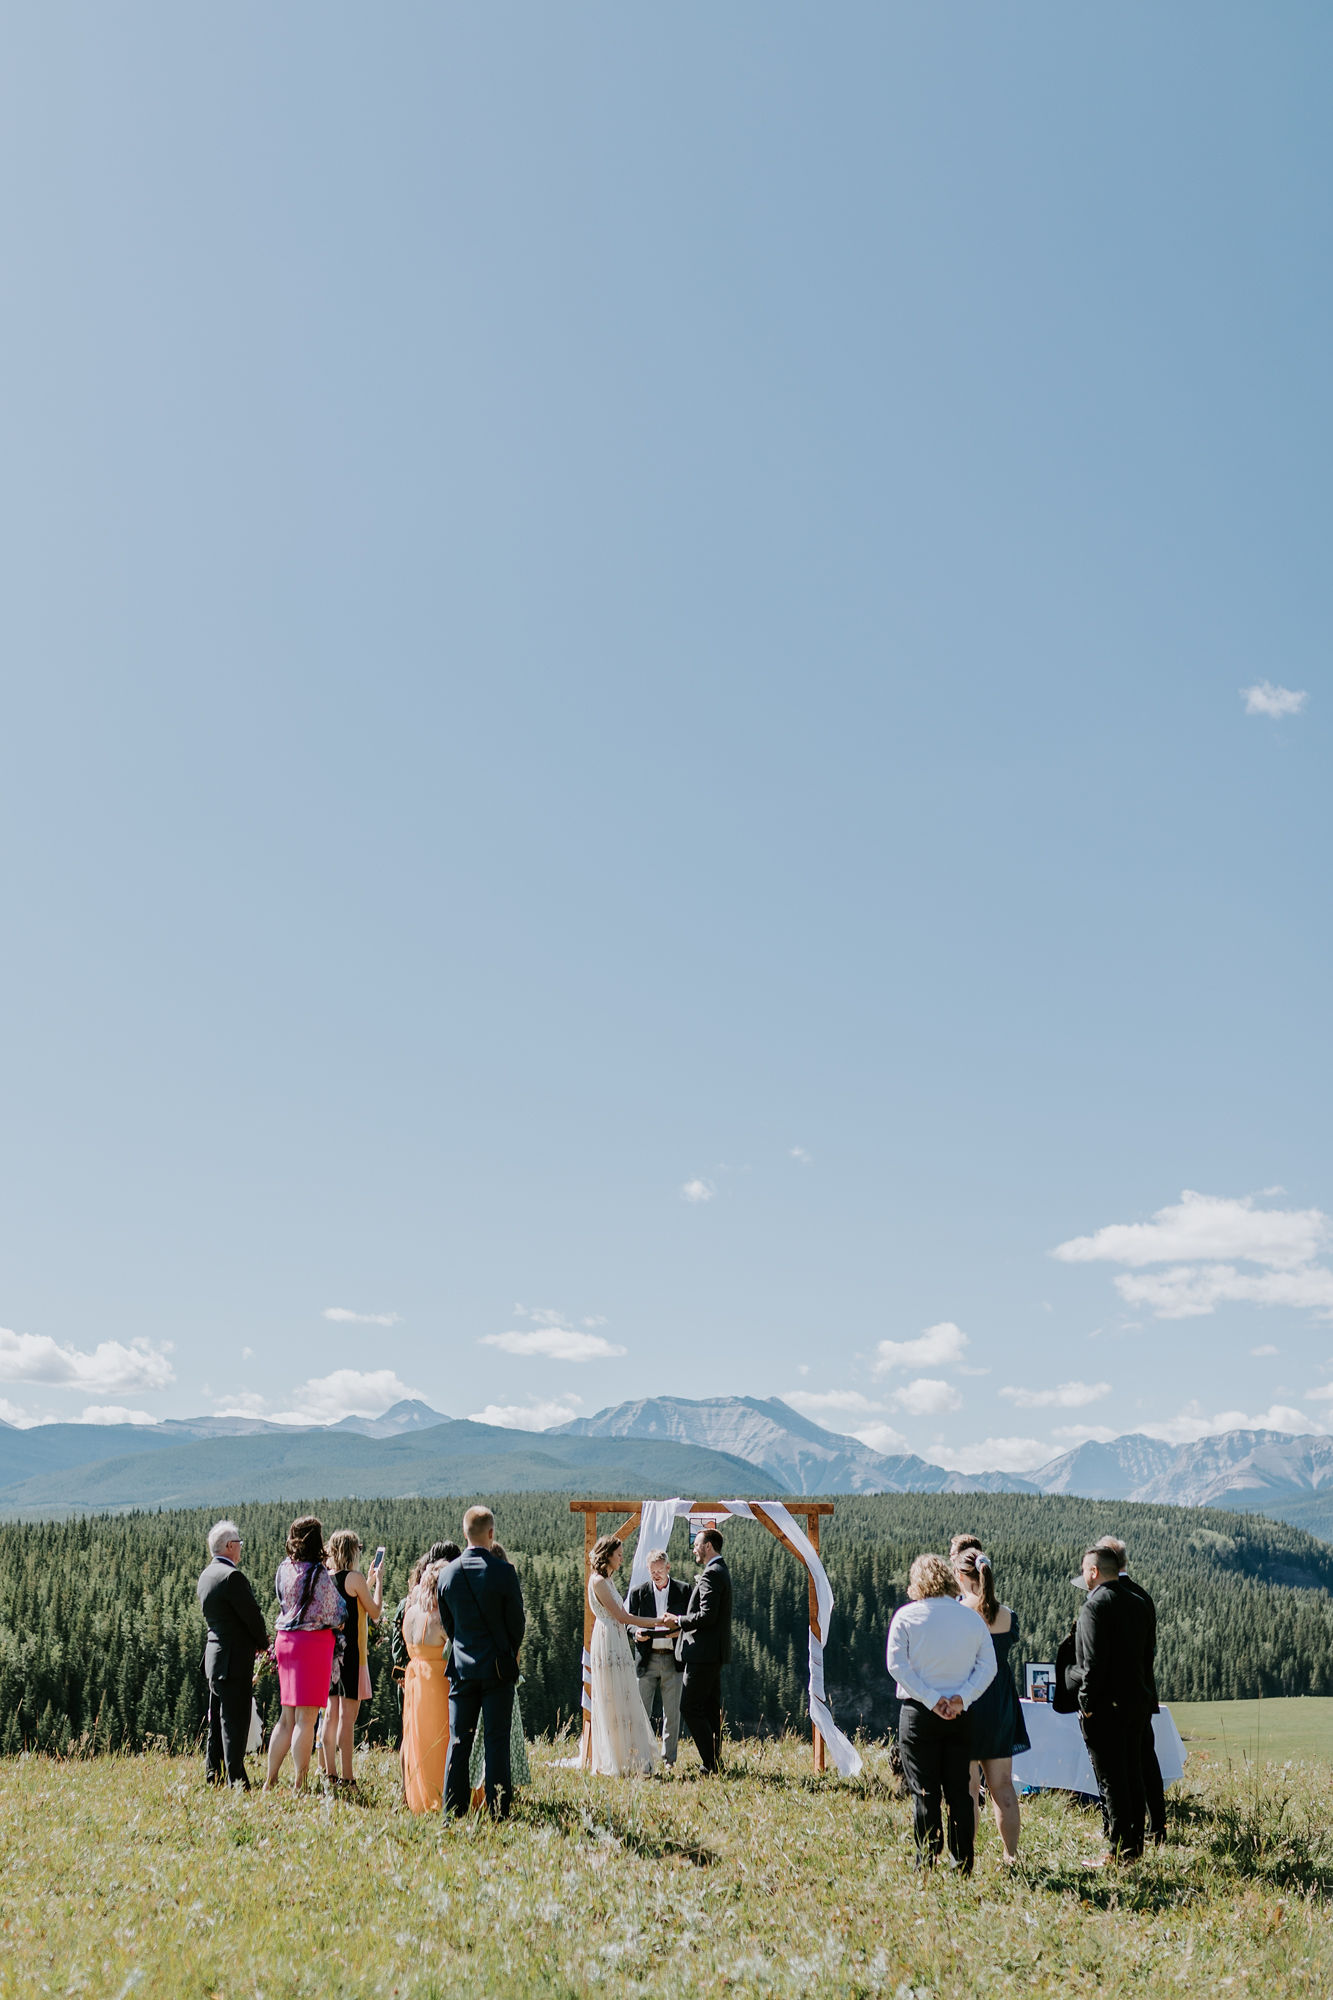 Young Hip & Married wedding at Big Horn Lookout, elopement